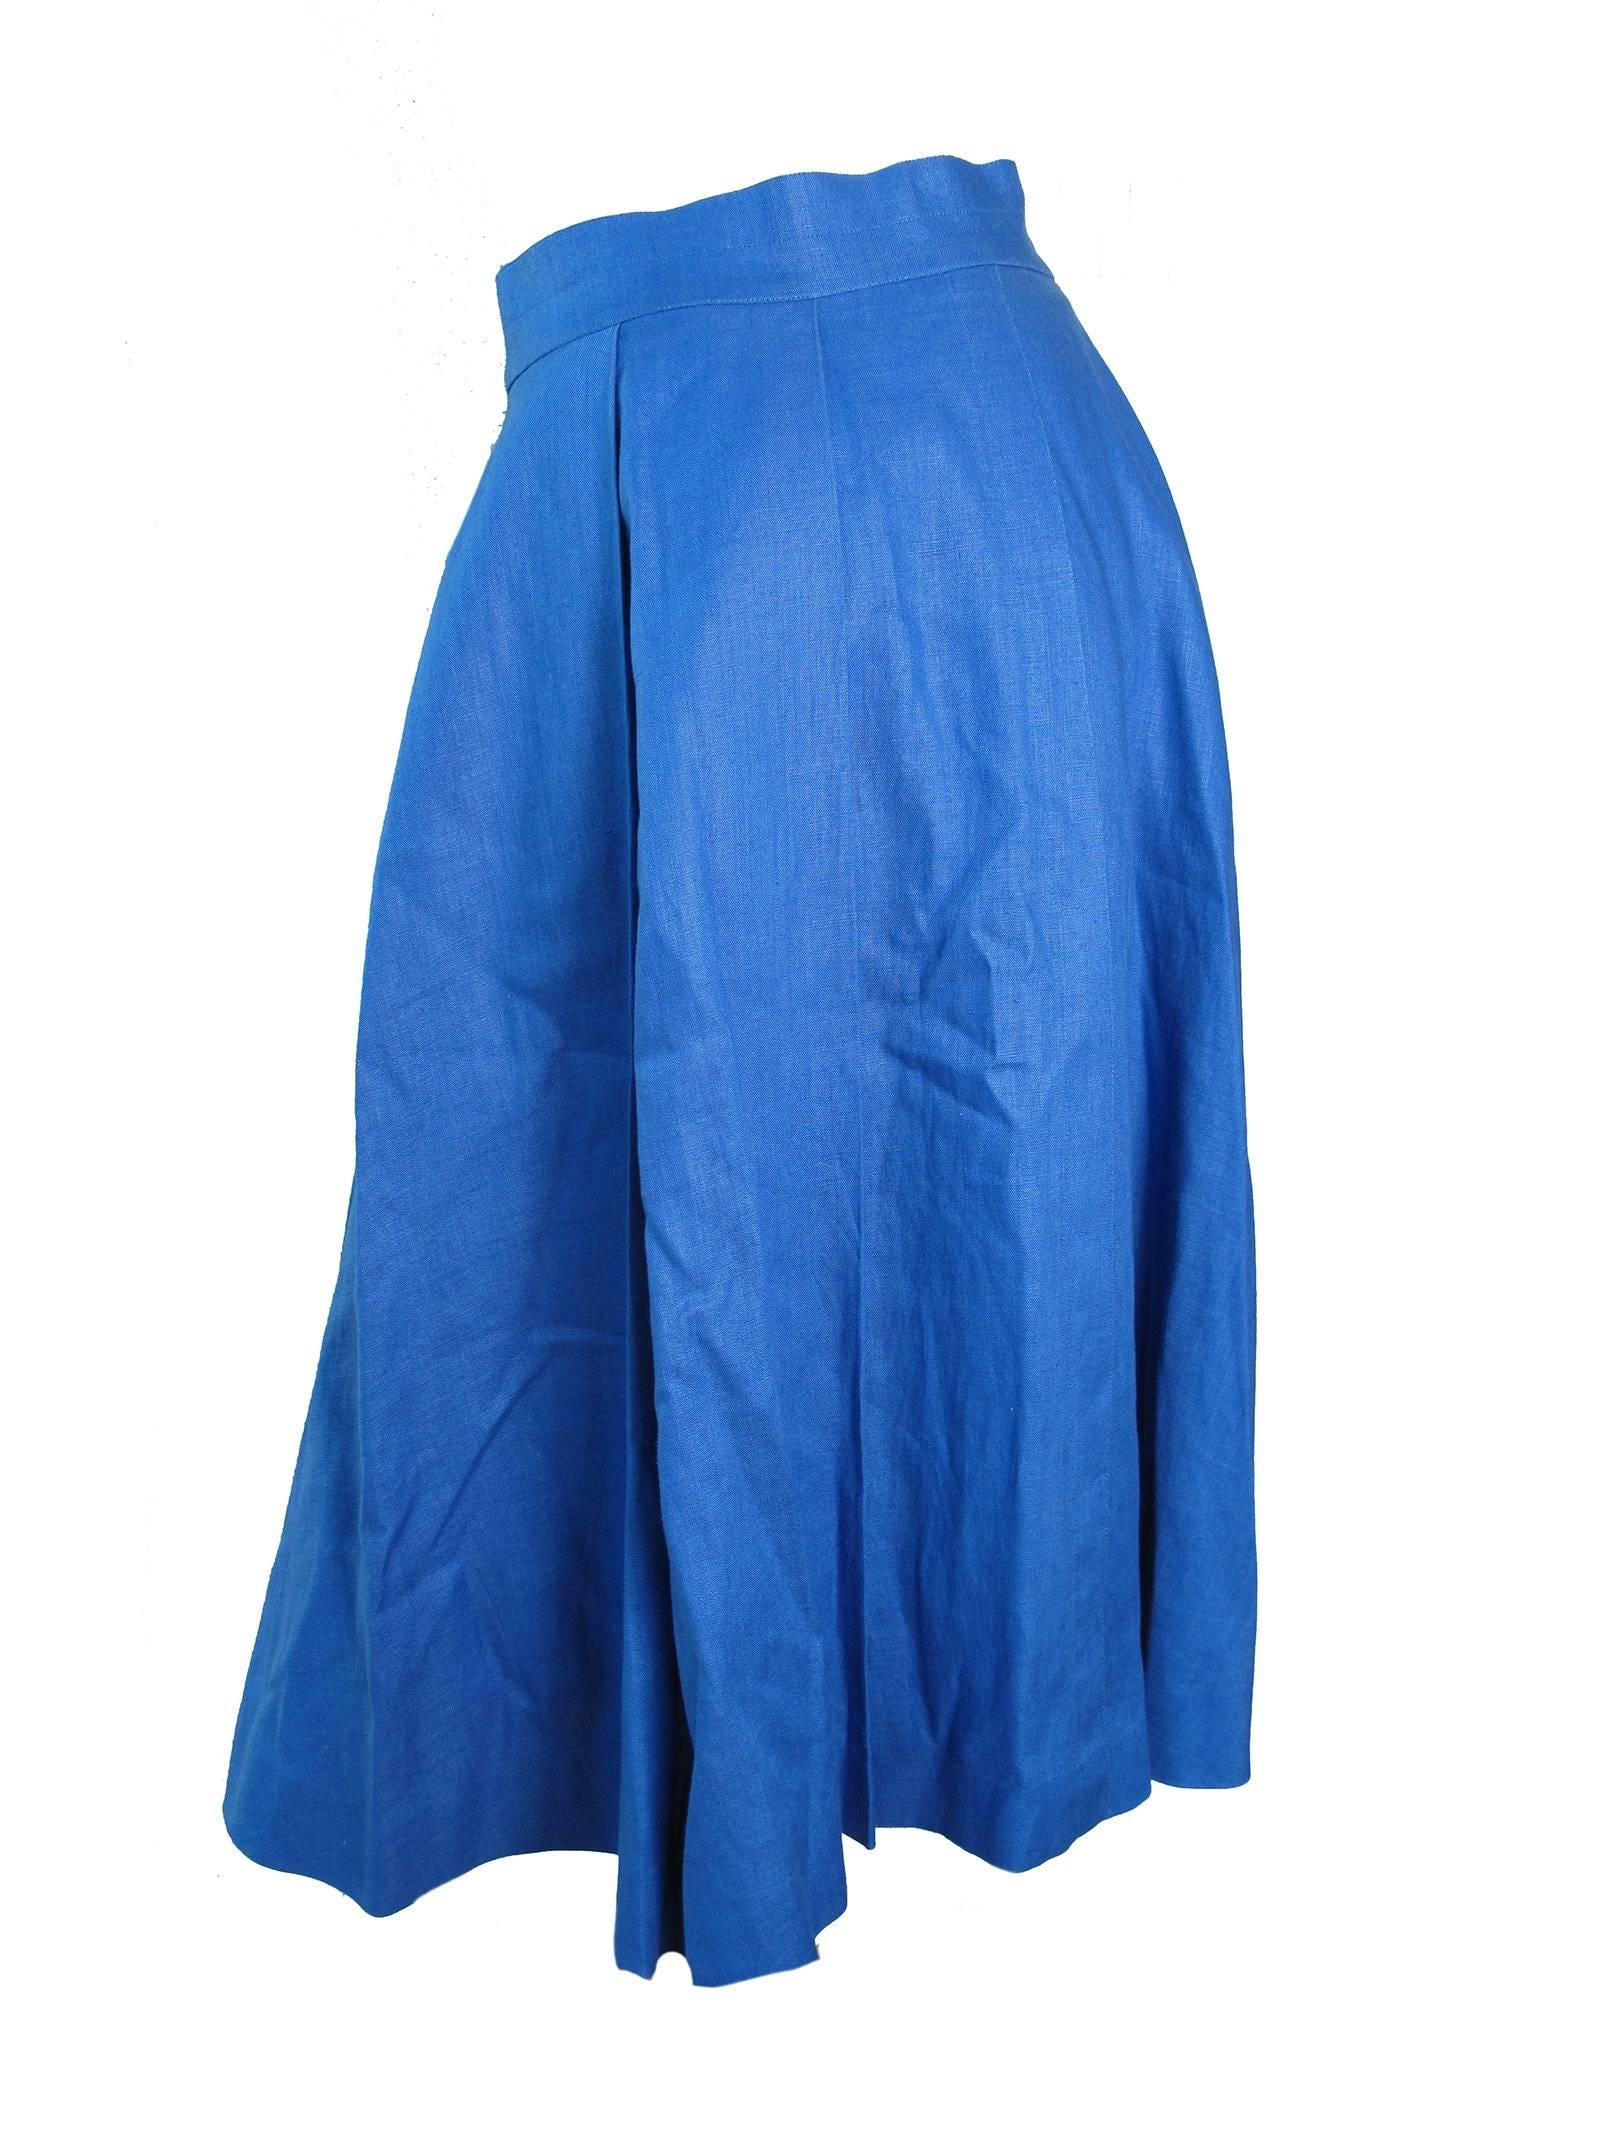 Hermes blue linen wrap skirt.  Condition: Very good.  Size 42

We accept returns for refund, please see our terms.  We offer free ground shipping within the US. 